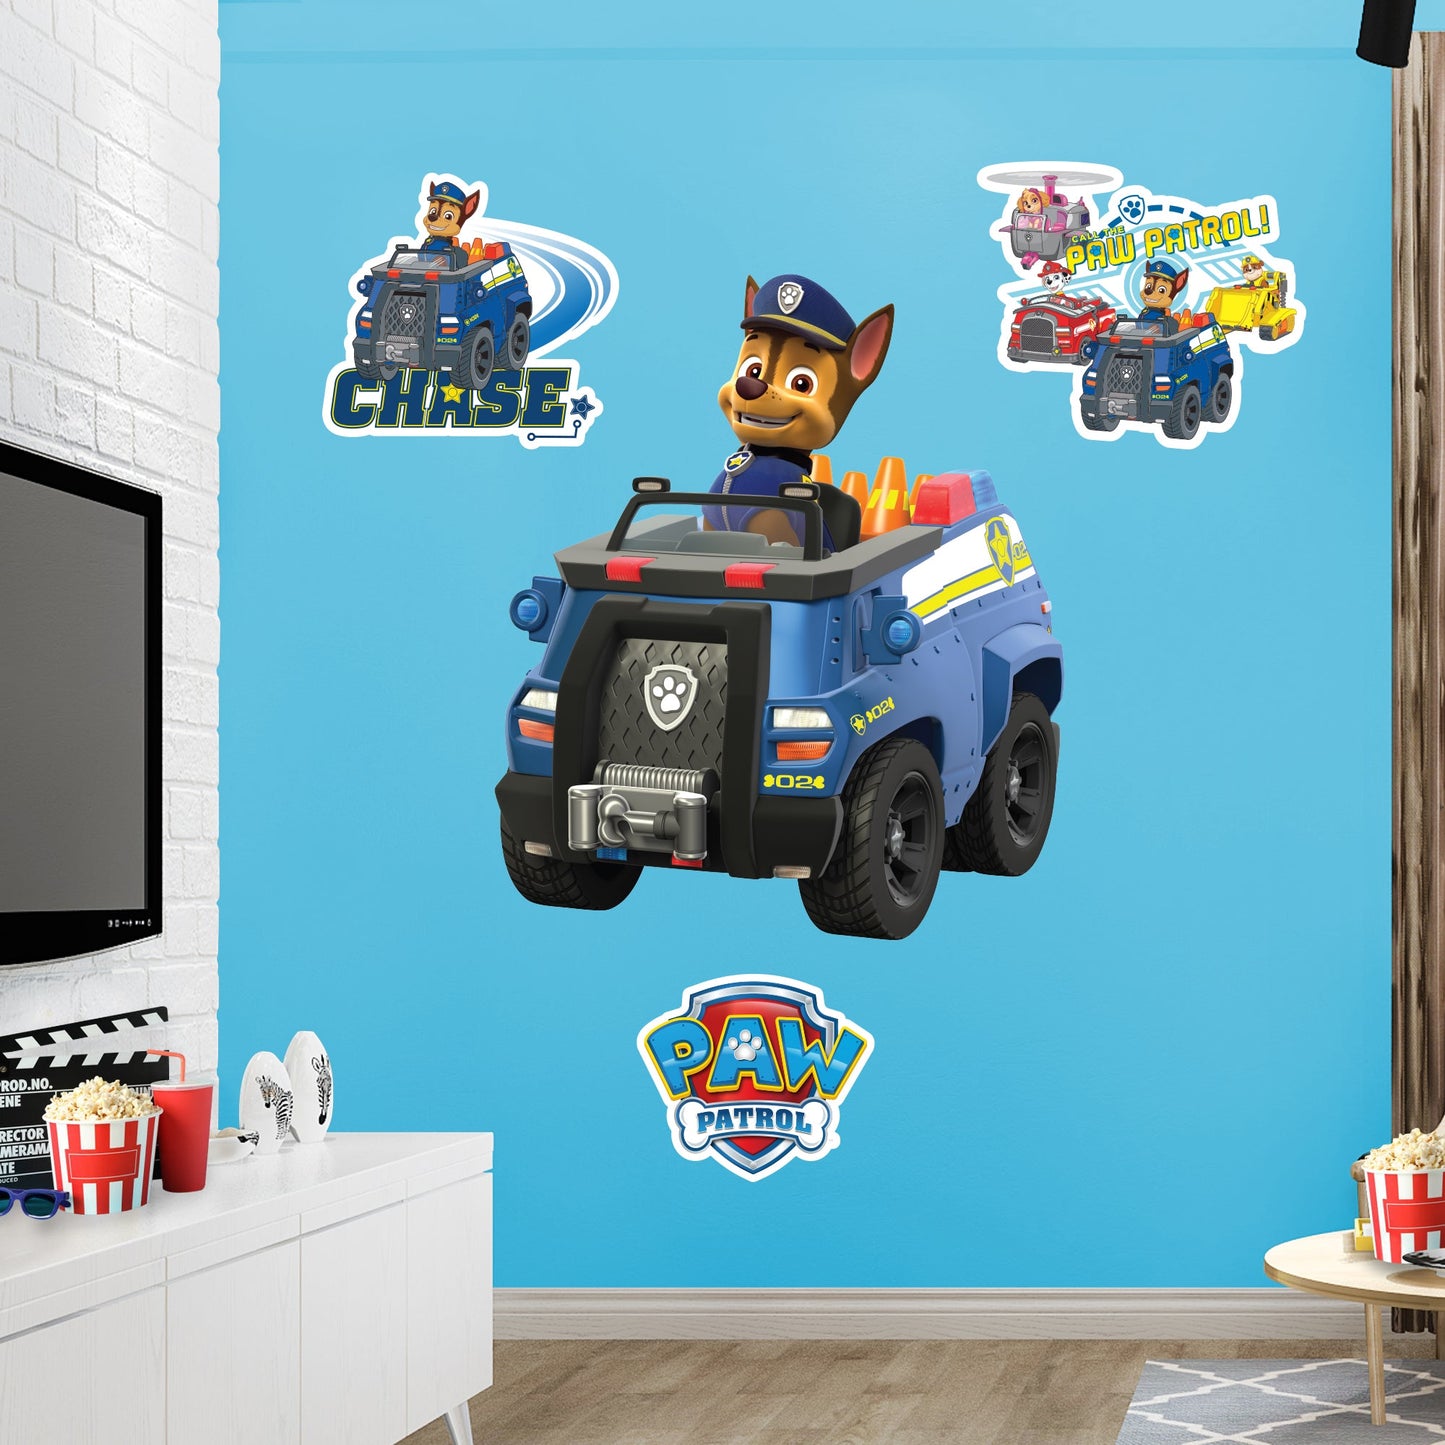 Paw Patrol: Chase Vehicle RealBig        - Officially Licensed Nickelodeon Removable     Adhesive Decal